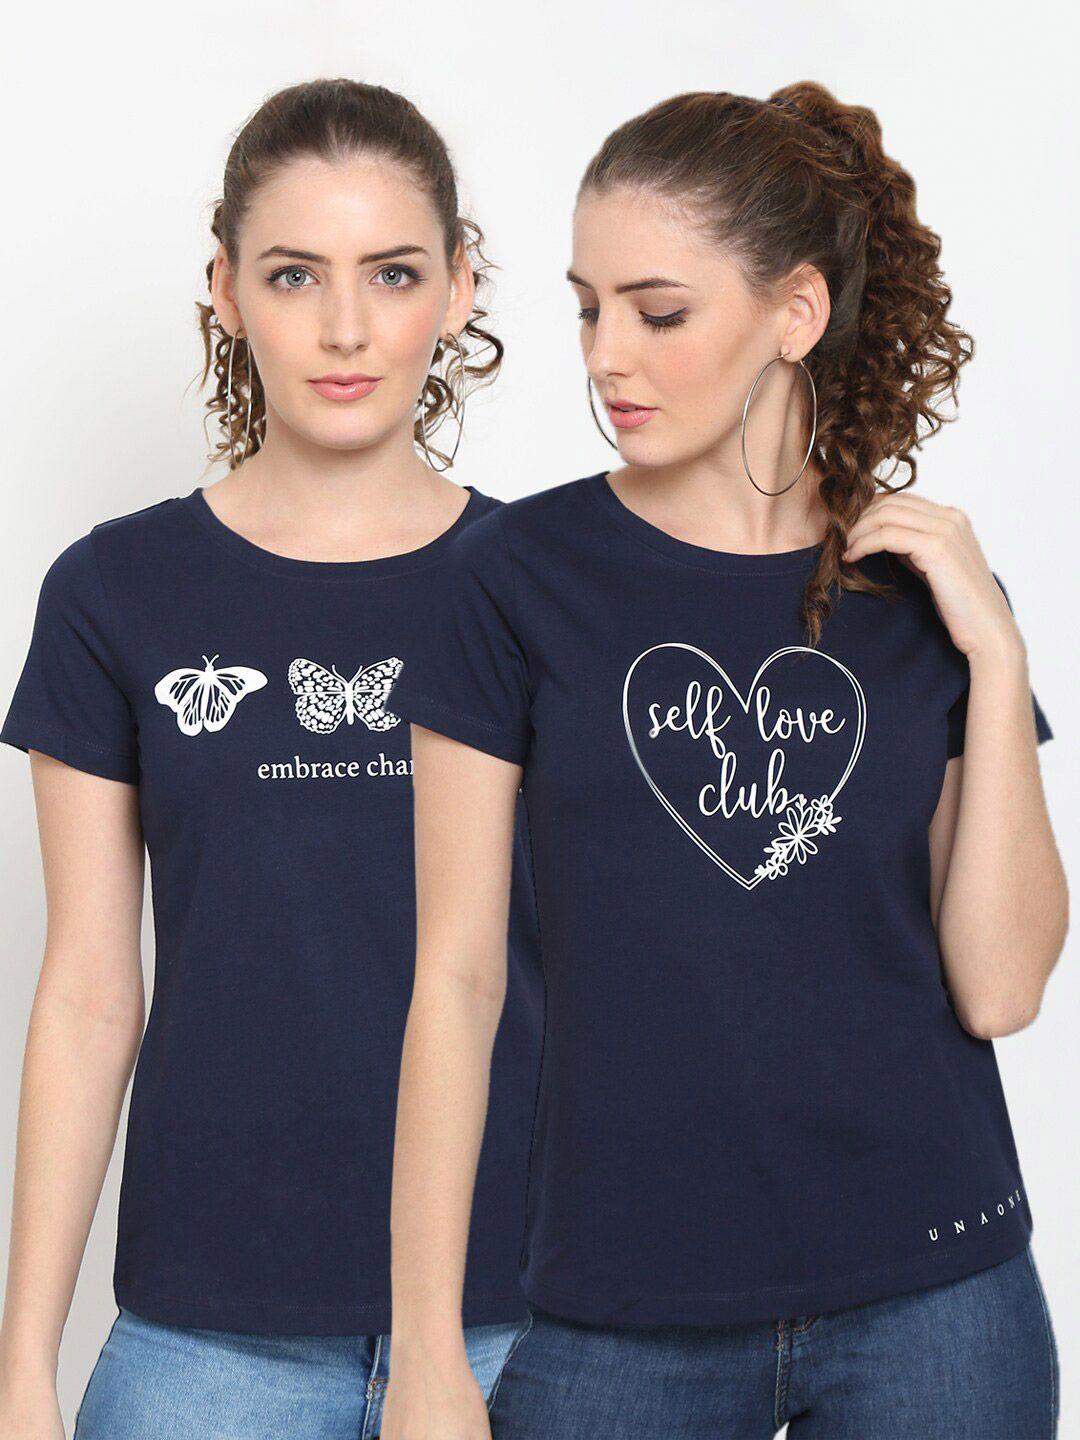 unaone women navy blue pack of 2 printed t-shirts